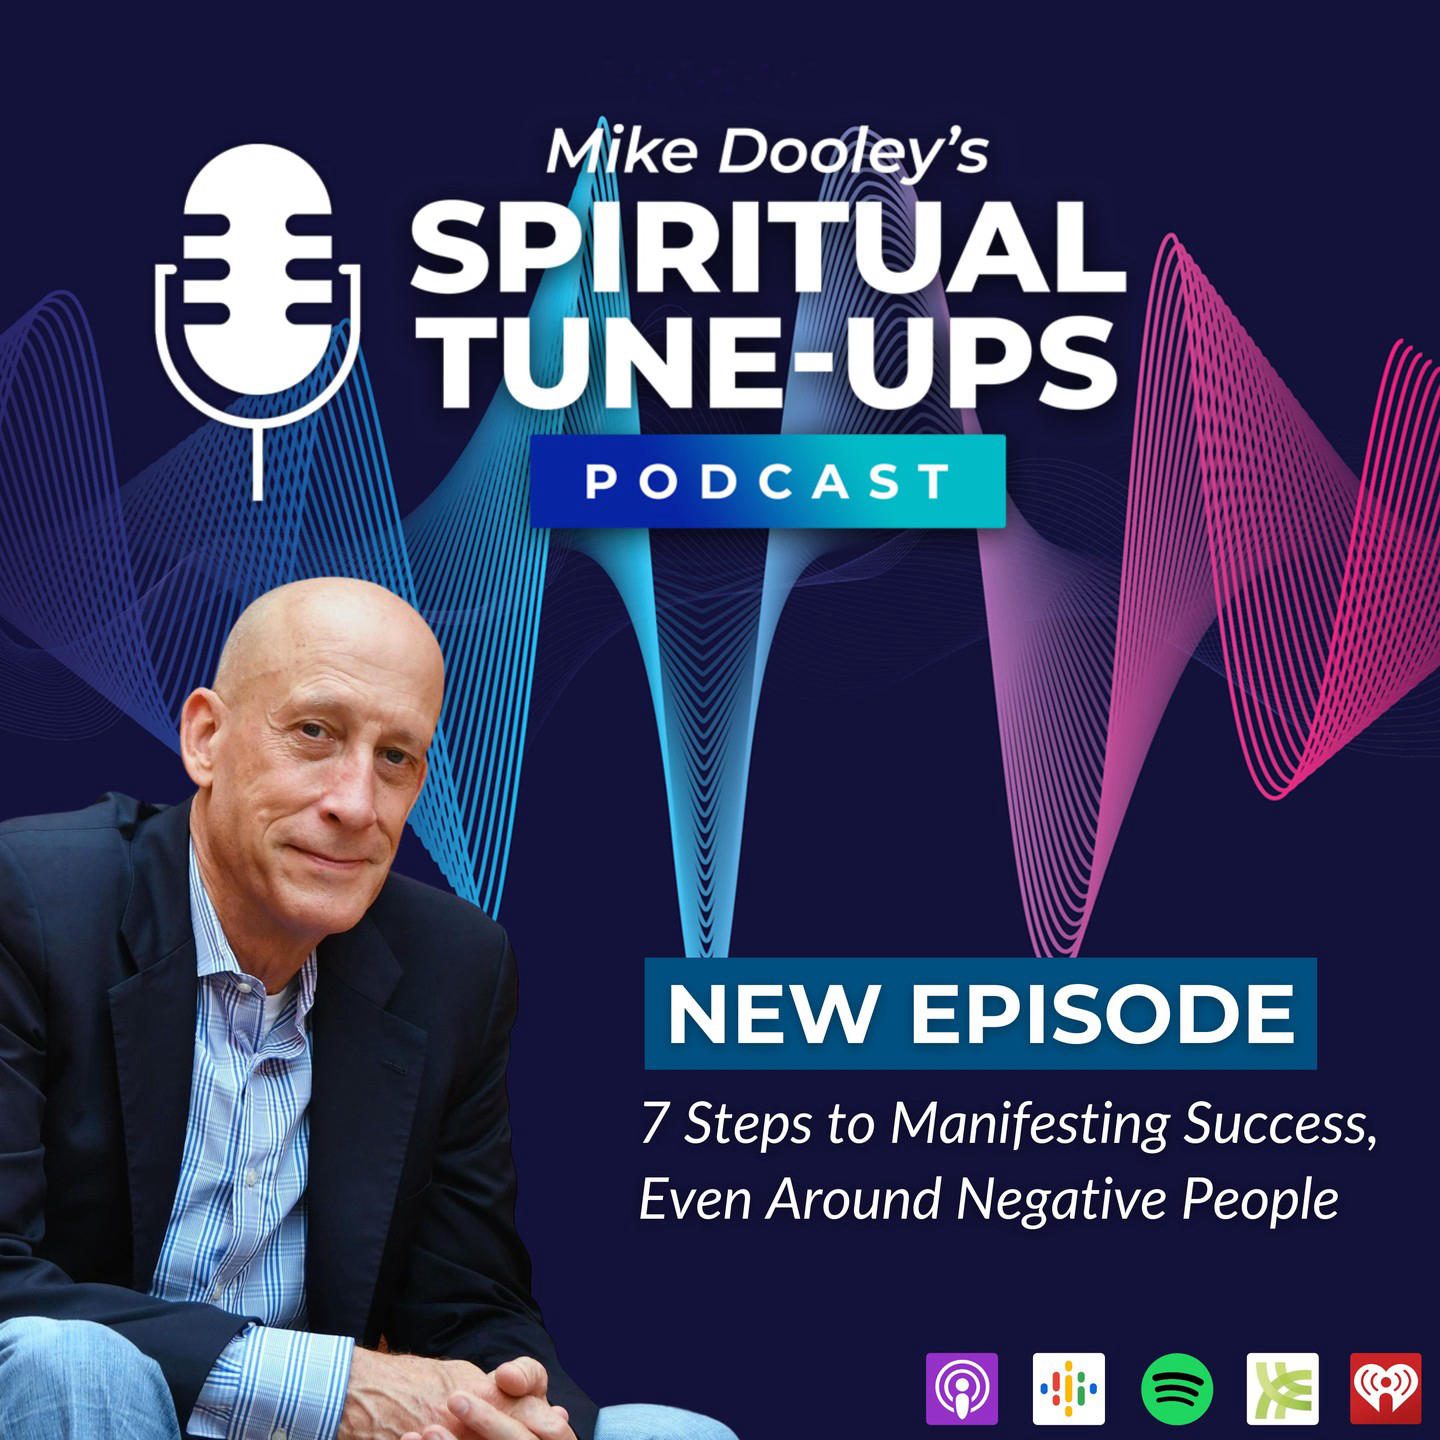 Mike Dooley - This week on the podcast